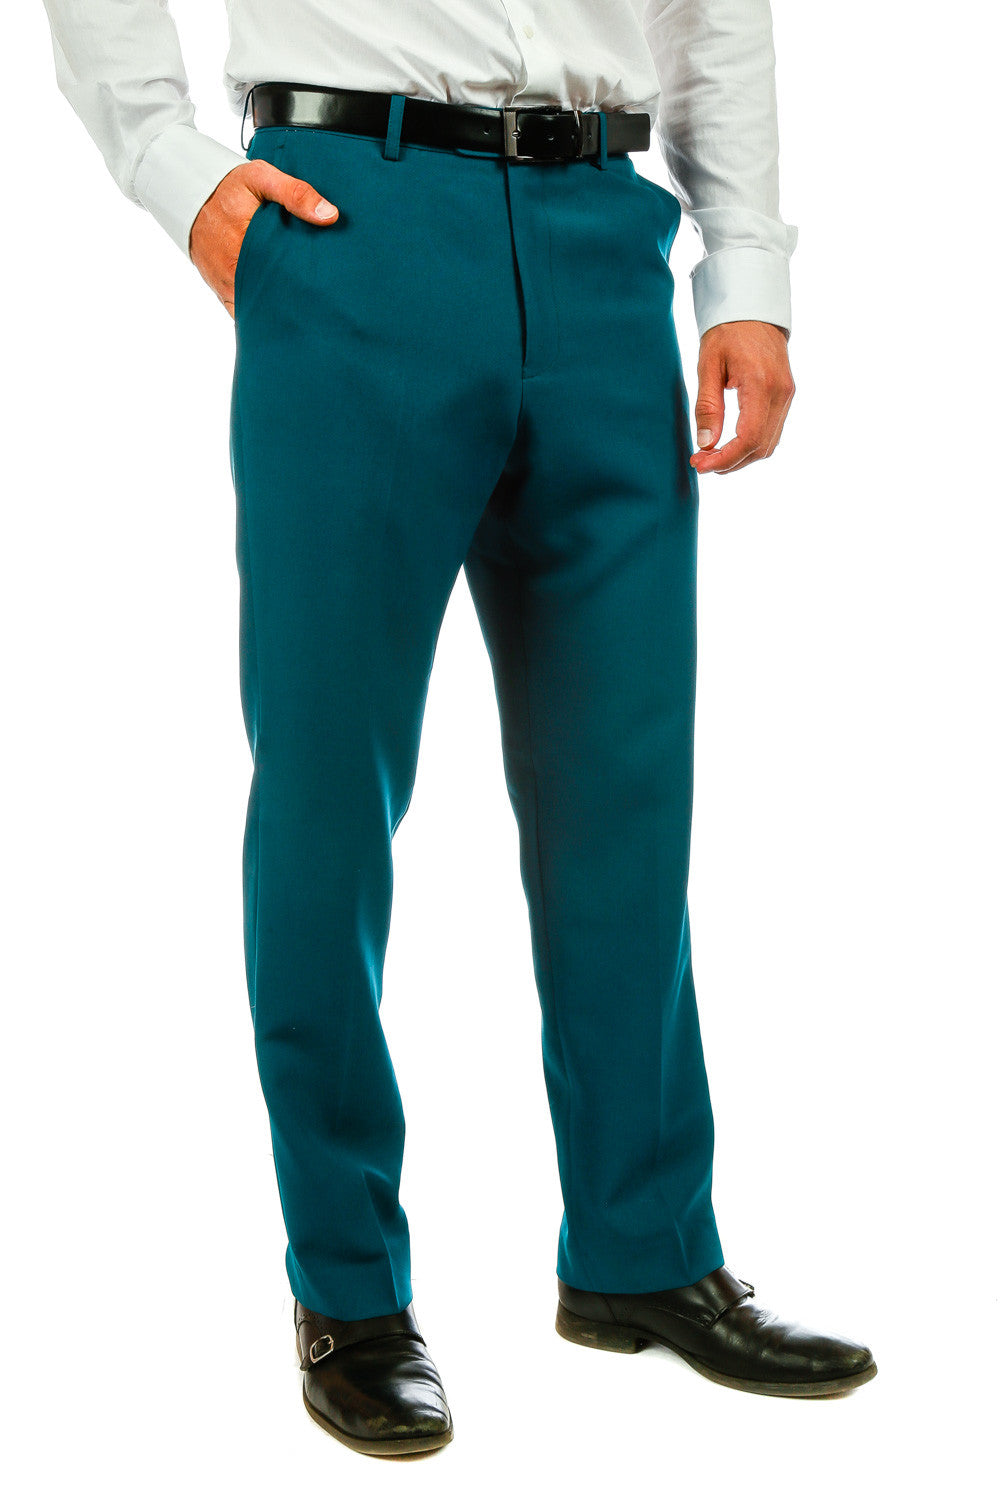 Teal Suit Pants - Shinesty